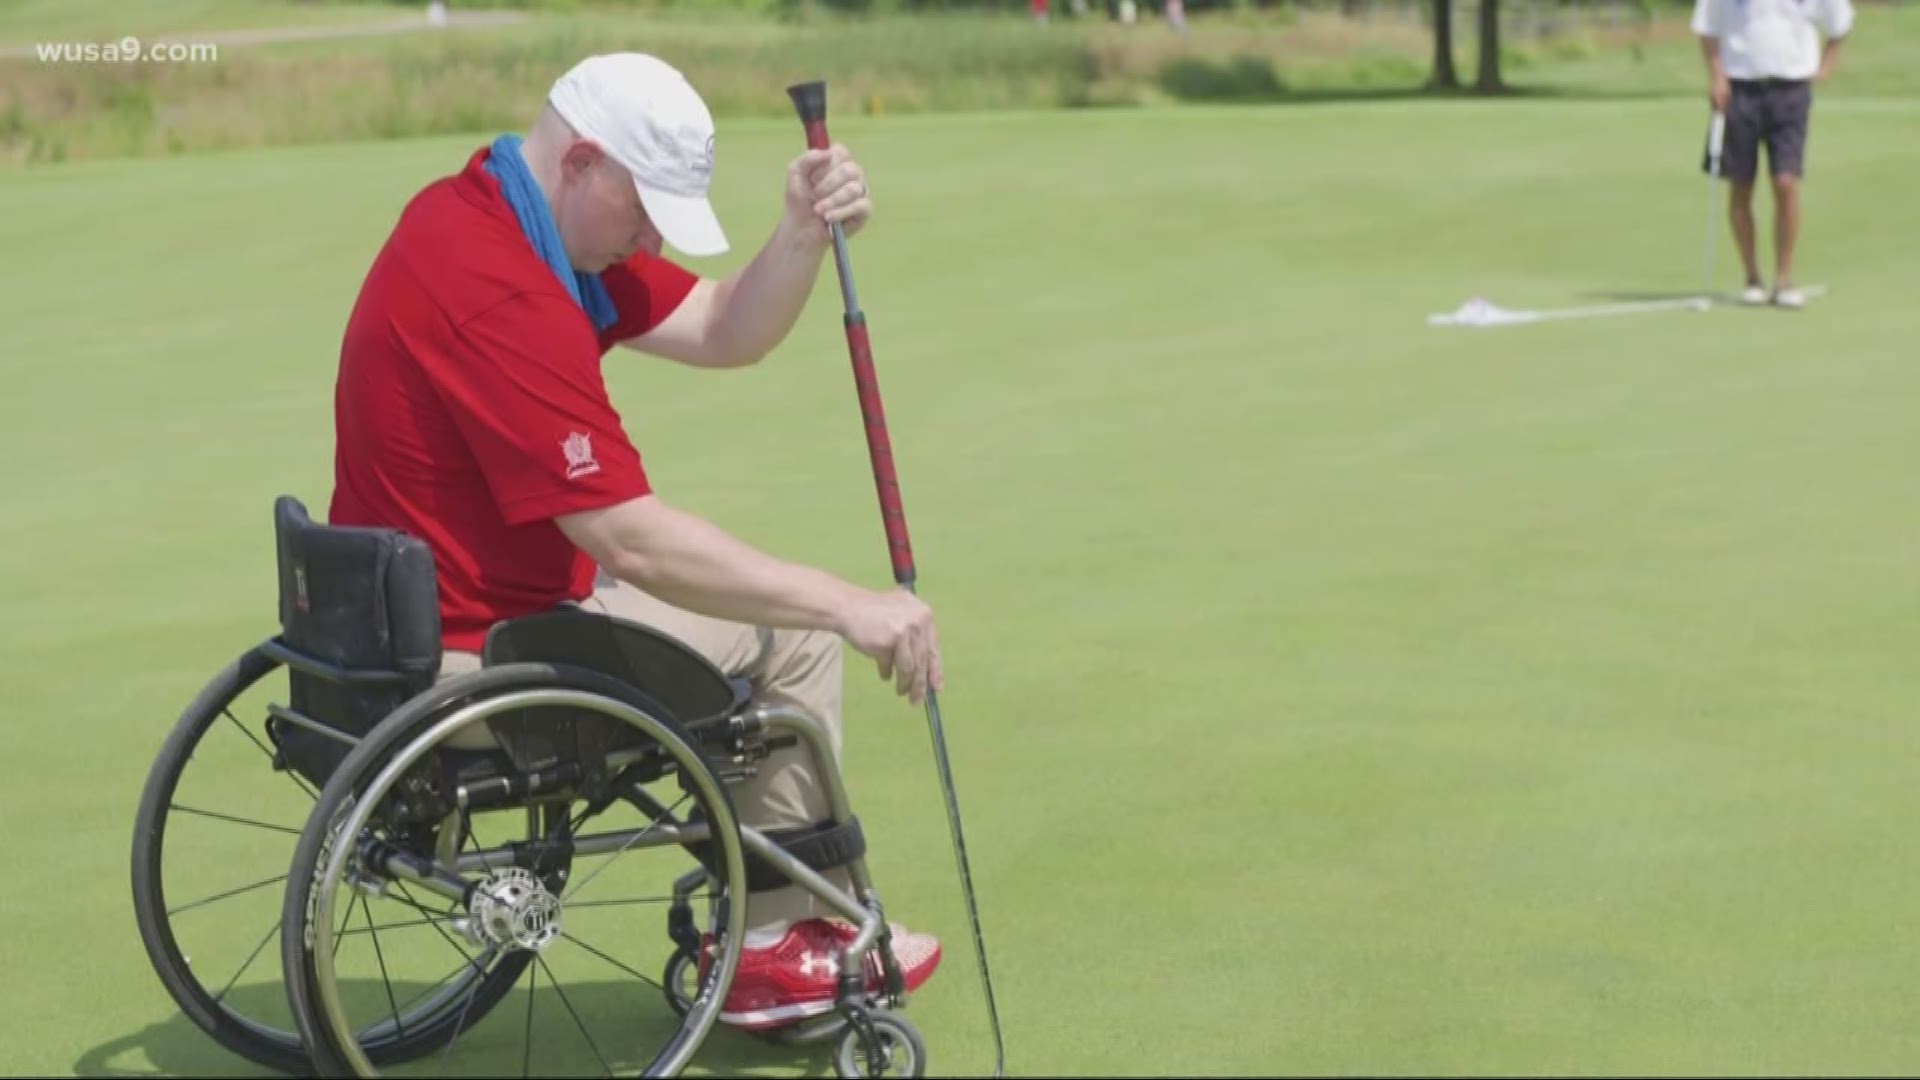 There's a charity golf open coming up on Sept. 23 that raises money for it's "Paving Access for Veterans Employment Program."